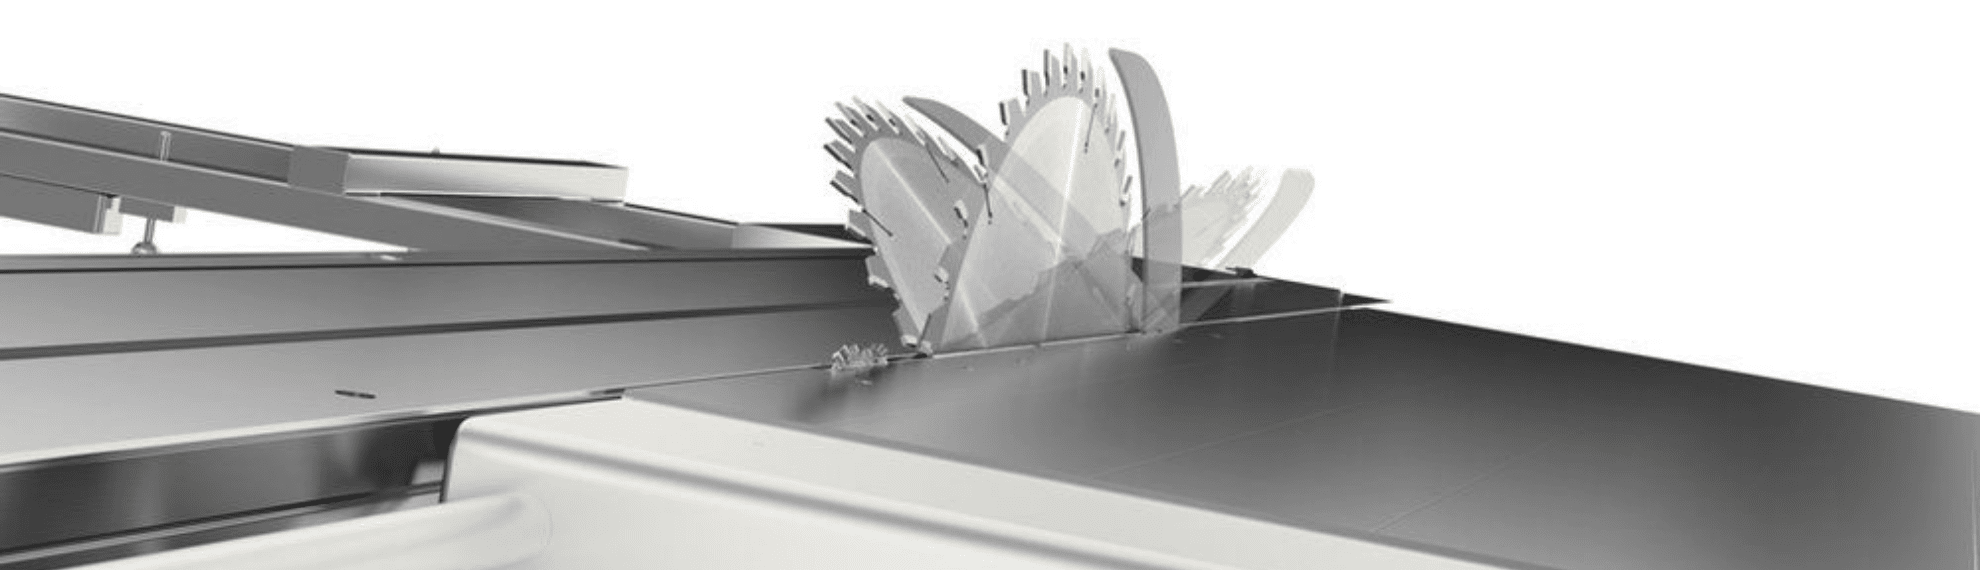 The blades on a panel saw